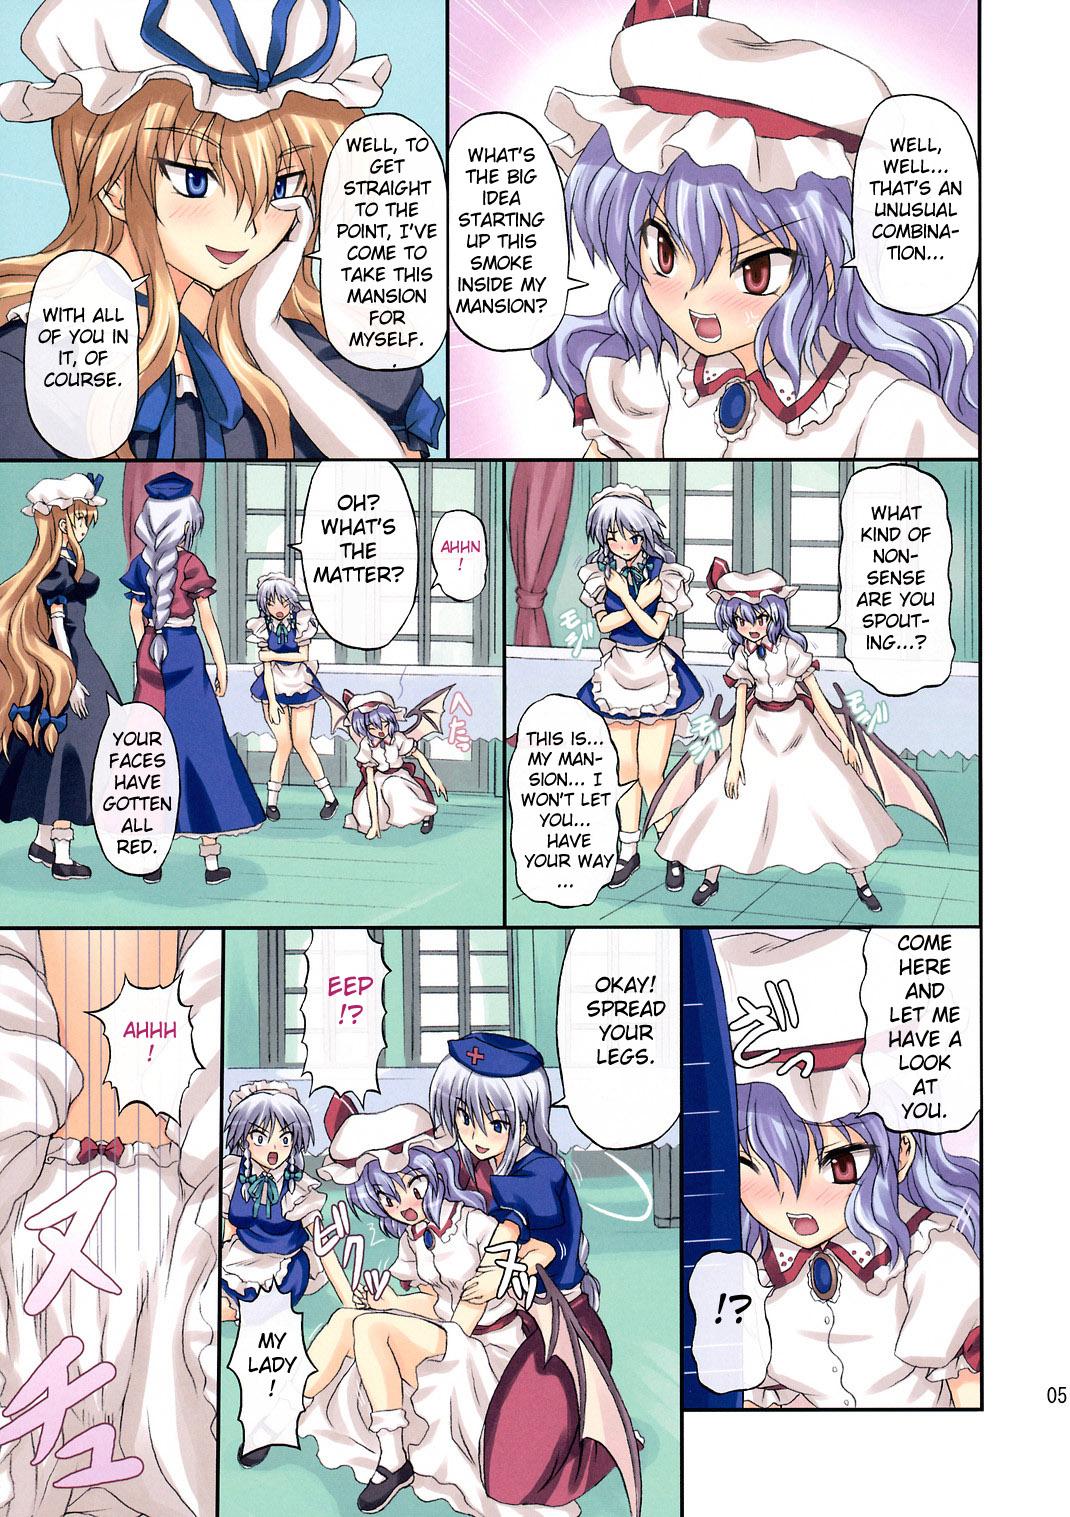 Hermosa Extend Party - Touhou project Trimmed - Page 5